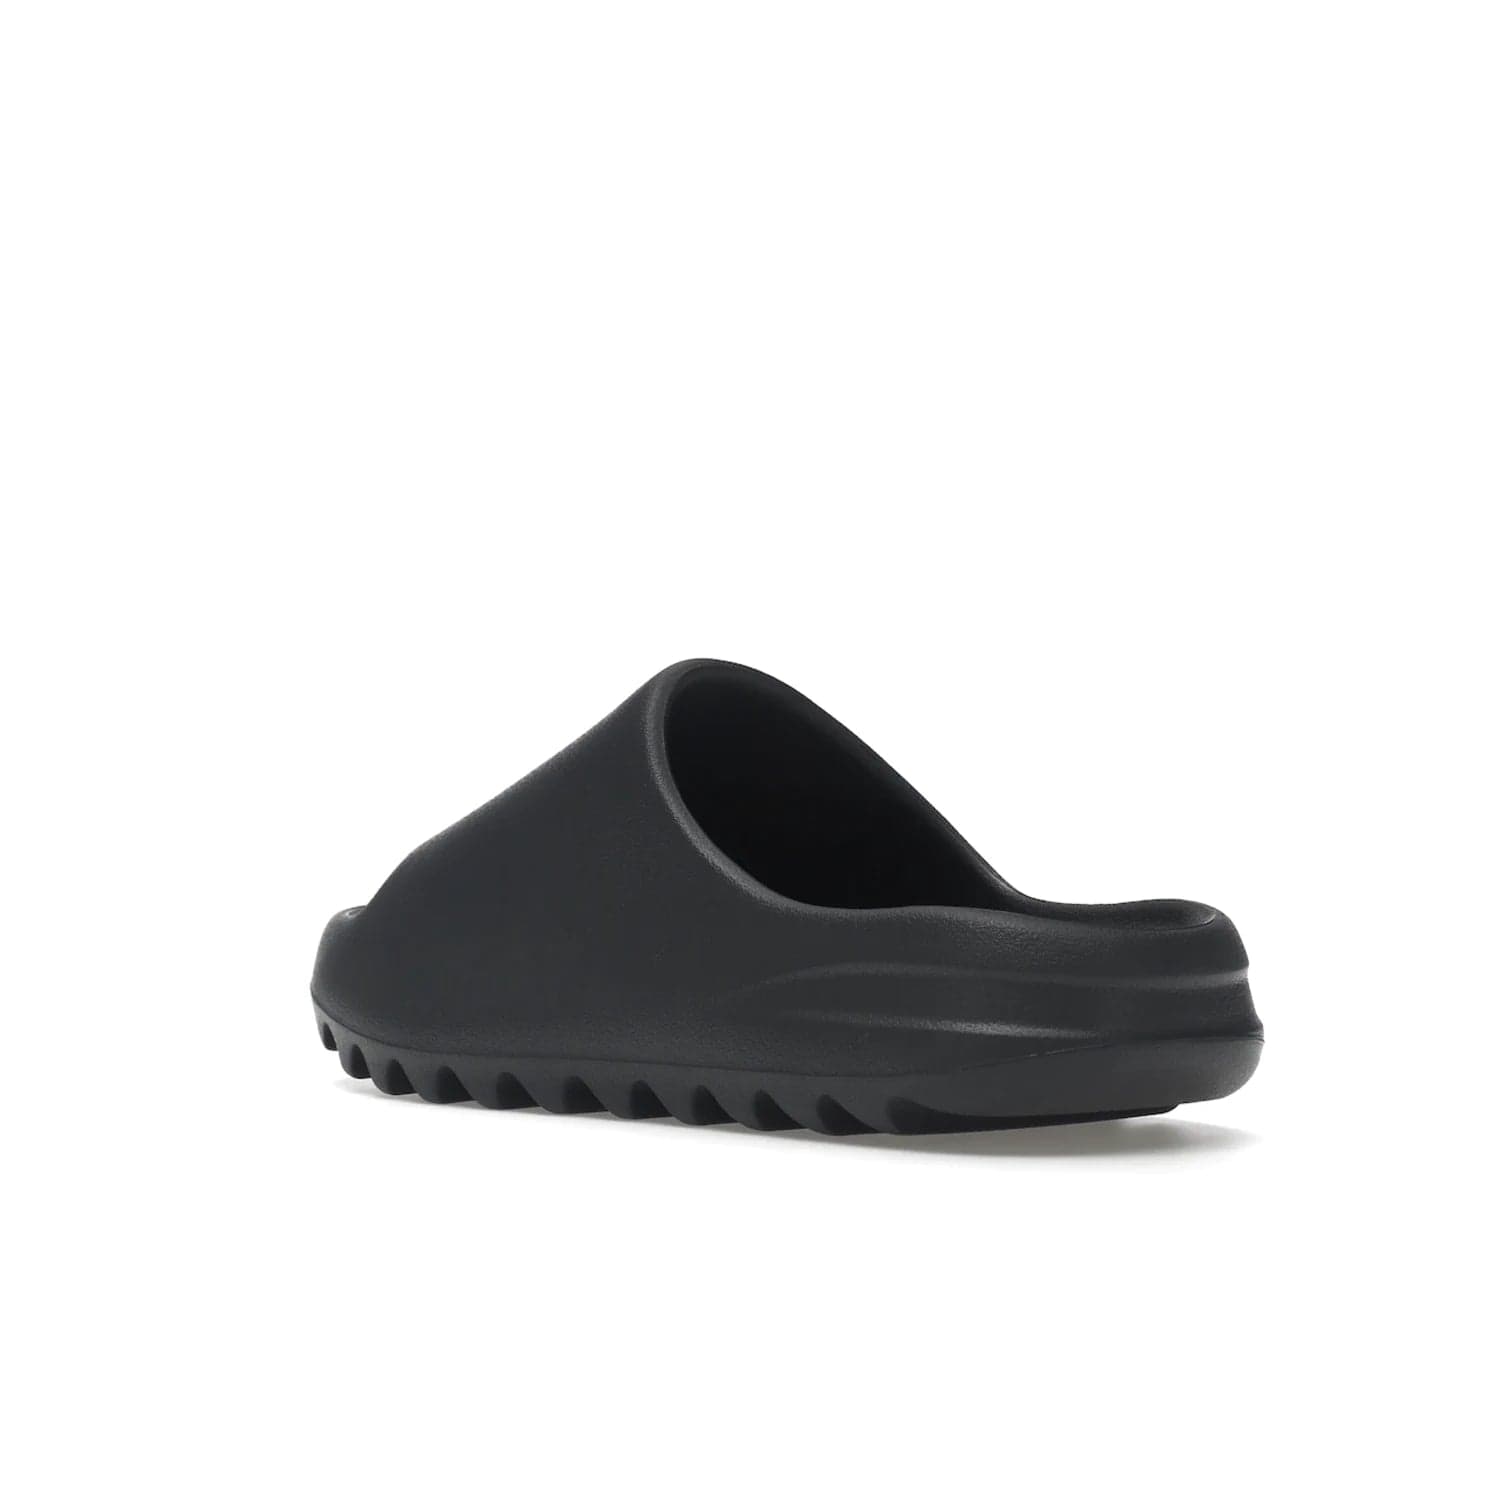 adidas Yeezy Slide Slate Grey - Image 24 - Only at www.BallersClubKickz.com - Stylish & comfortable adidas Yeezy Slide Slate Grey features an EVA foam upper, strategic cutouts, textured outsole pattern, & easy slip-on design for modern comfort & classic style.